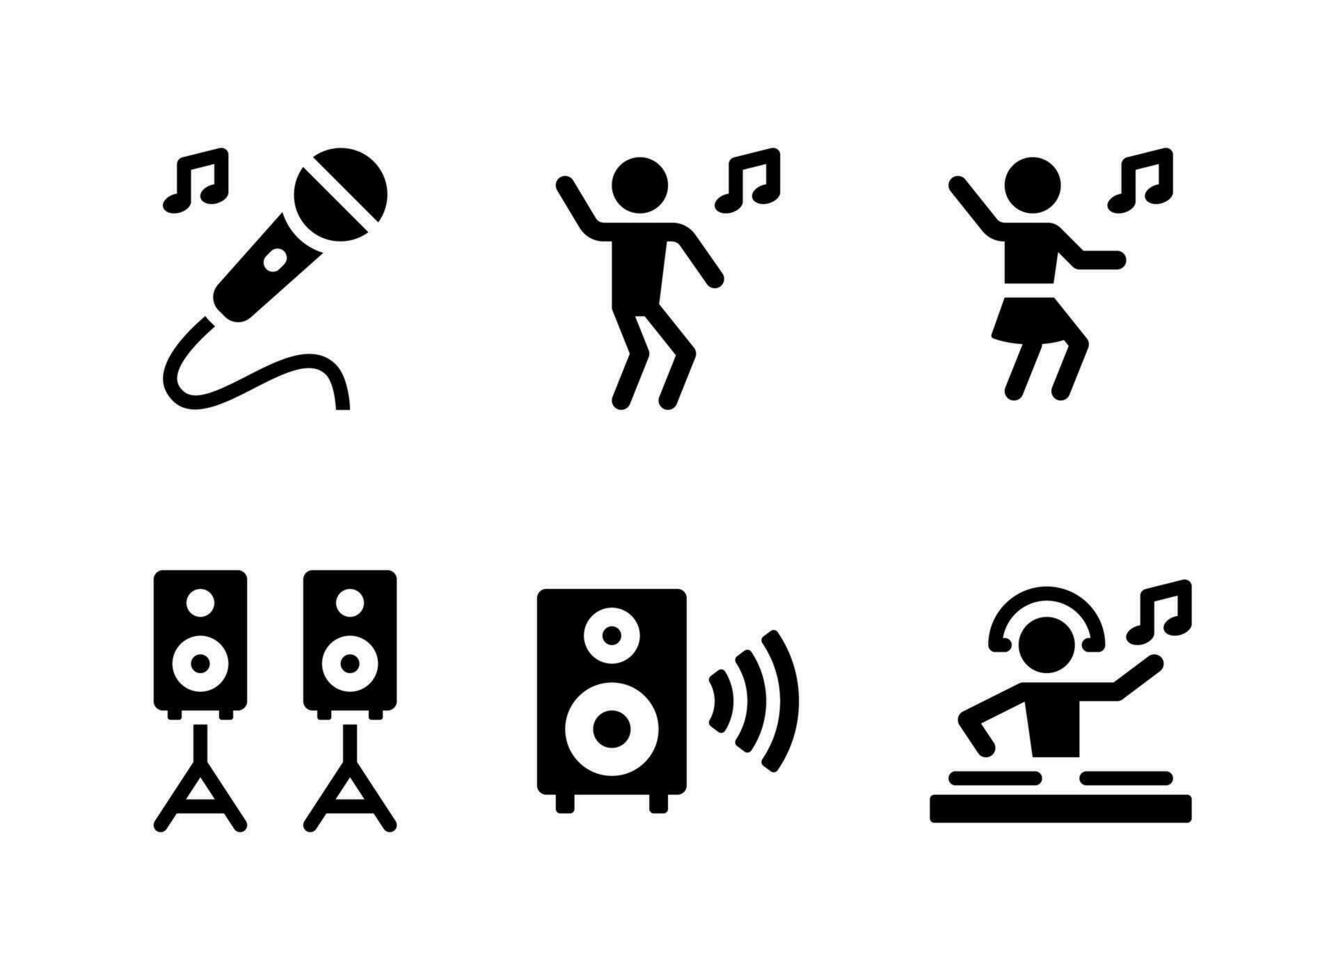 Simple Set of Party Related Vector Solid Icons. Contains Icons as Microphone, Dancing, Speakers and more.